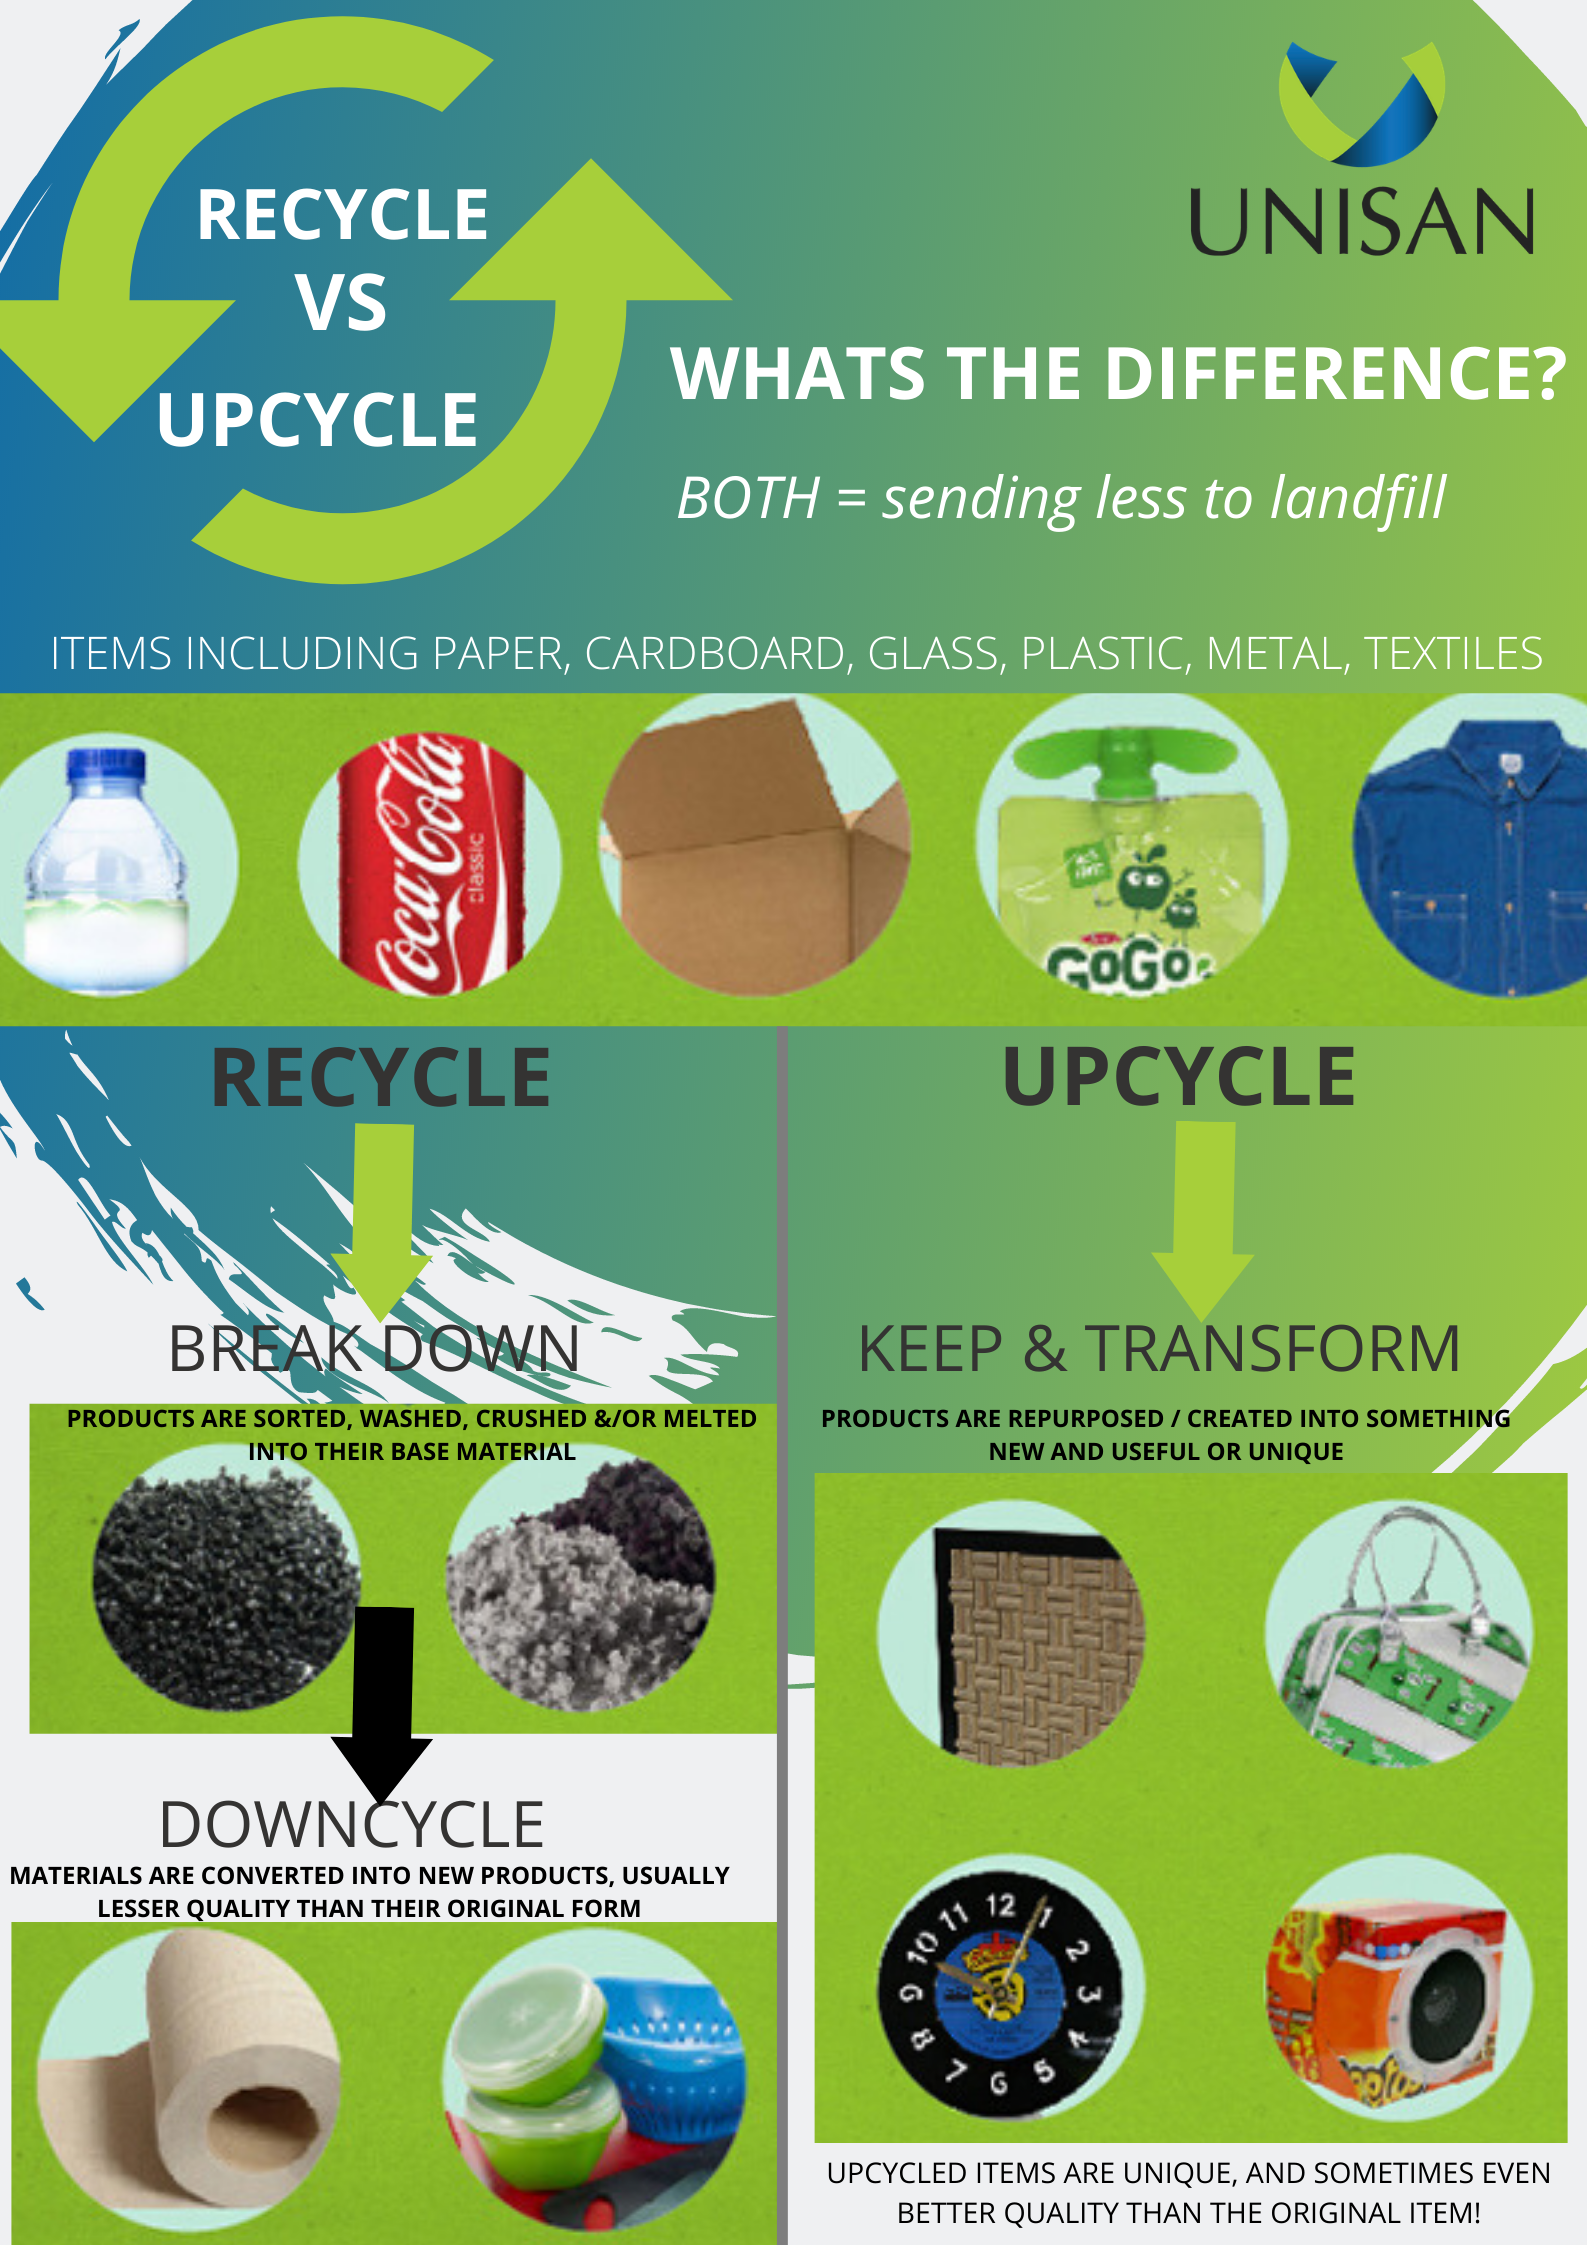 UPCYCLING AND RECYCLING WHATS THE DIFFERENCE